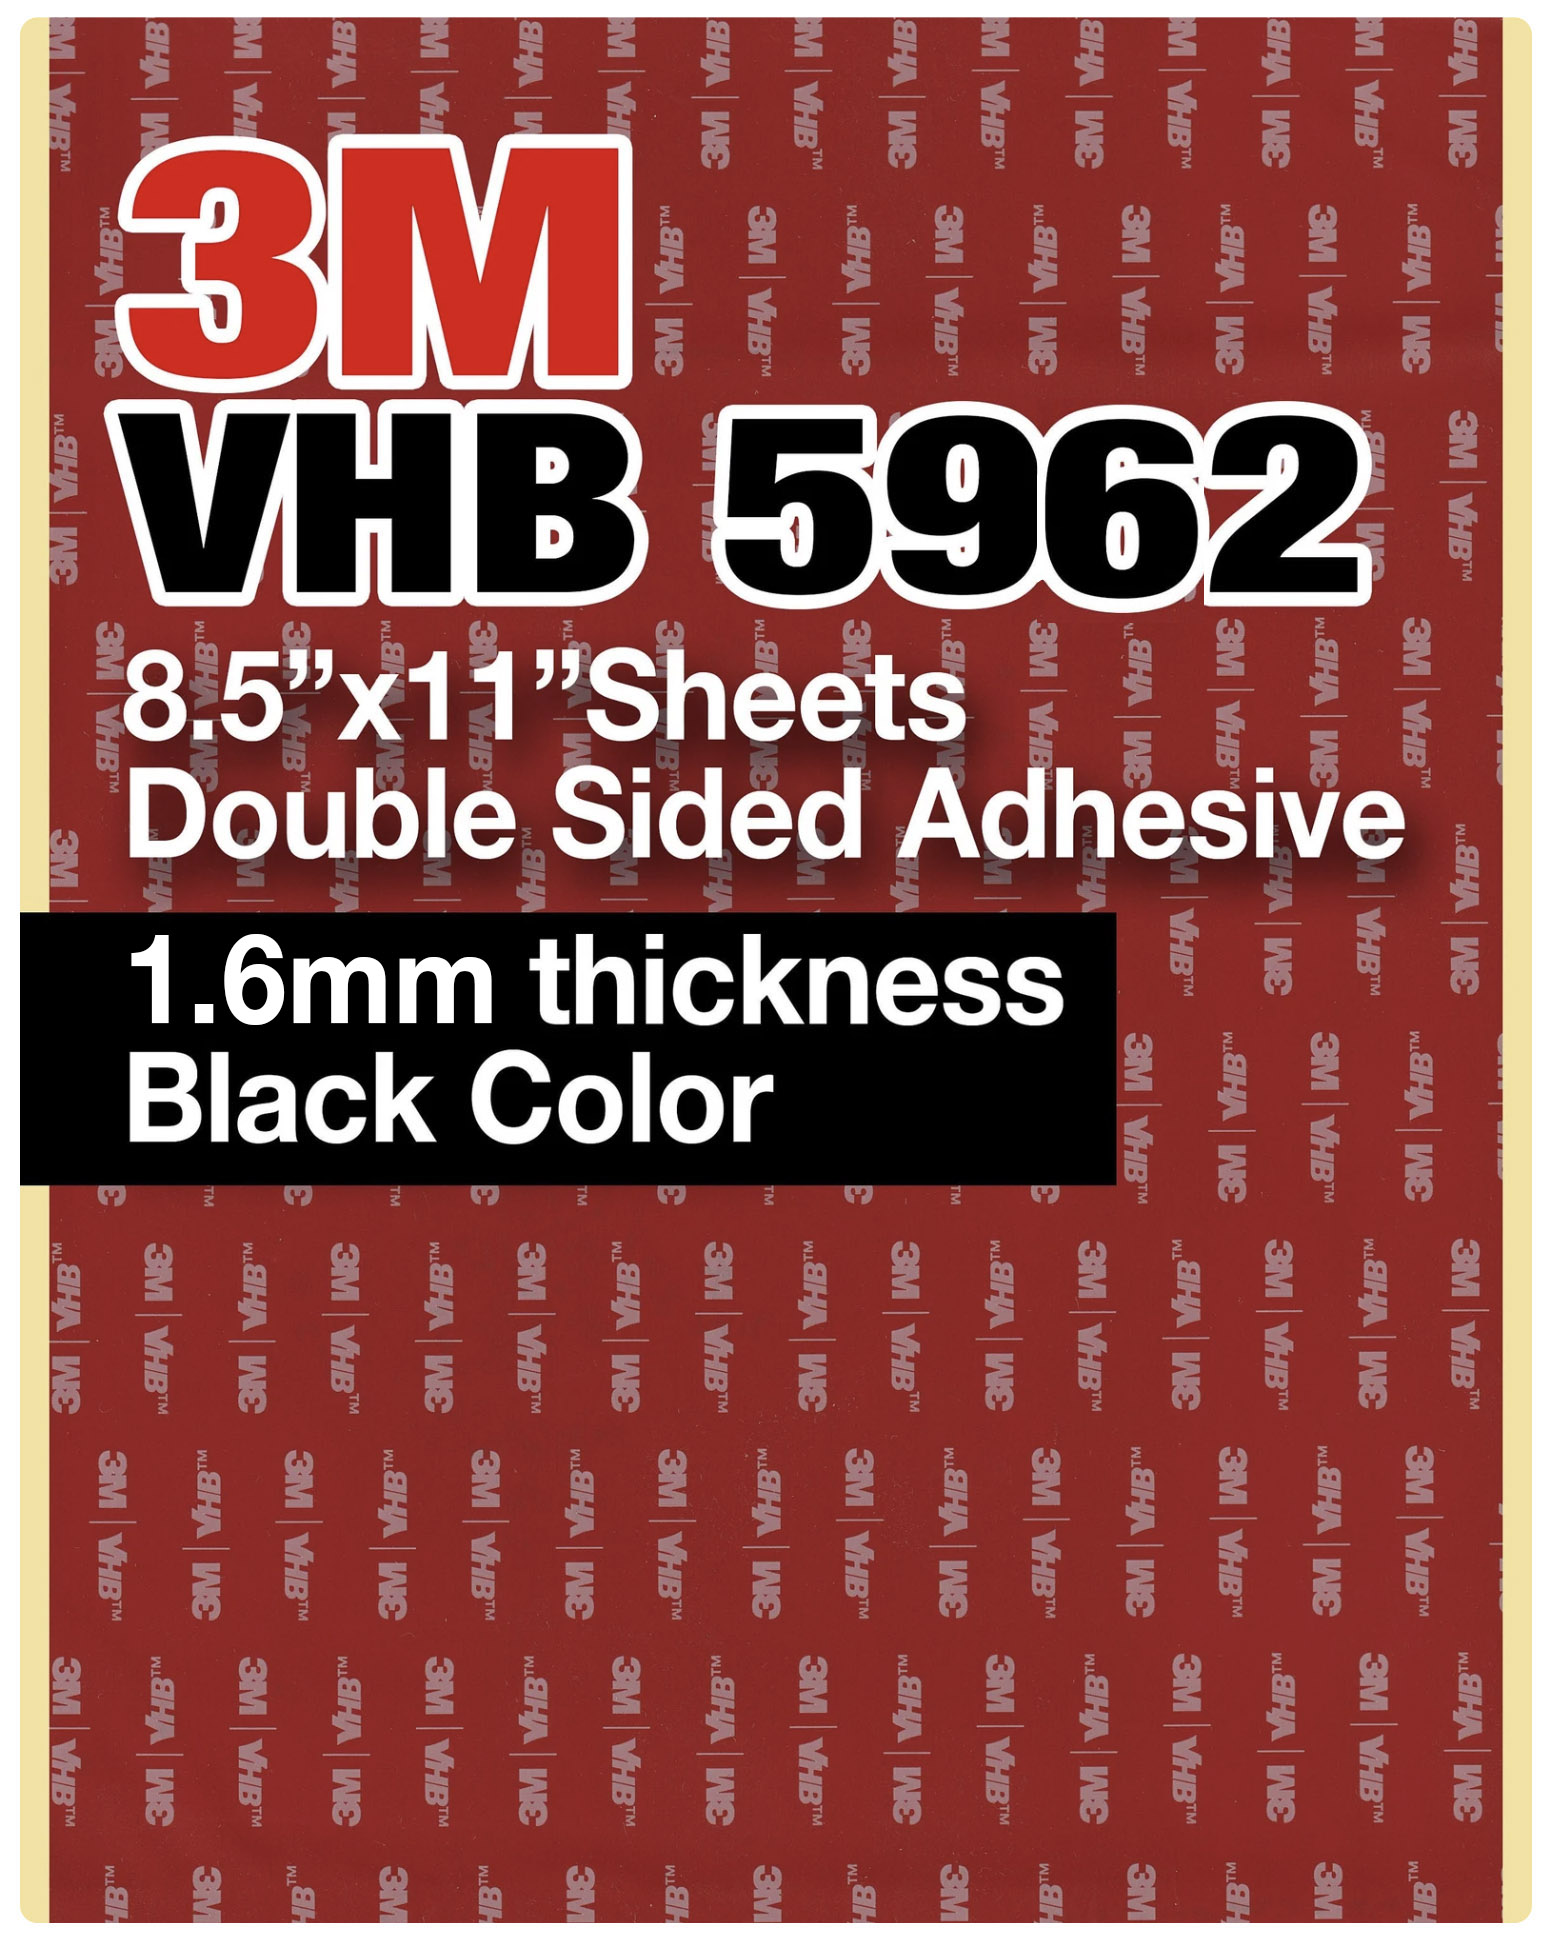 3M VHB 5962 8.5x11 Double Sided Strong Adhesive 1.6mm thickness black  sheets